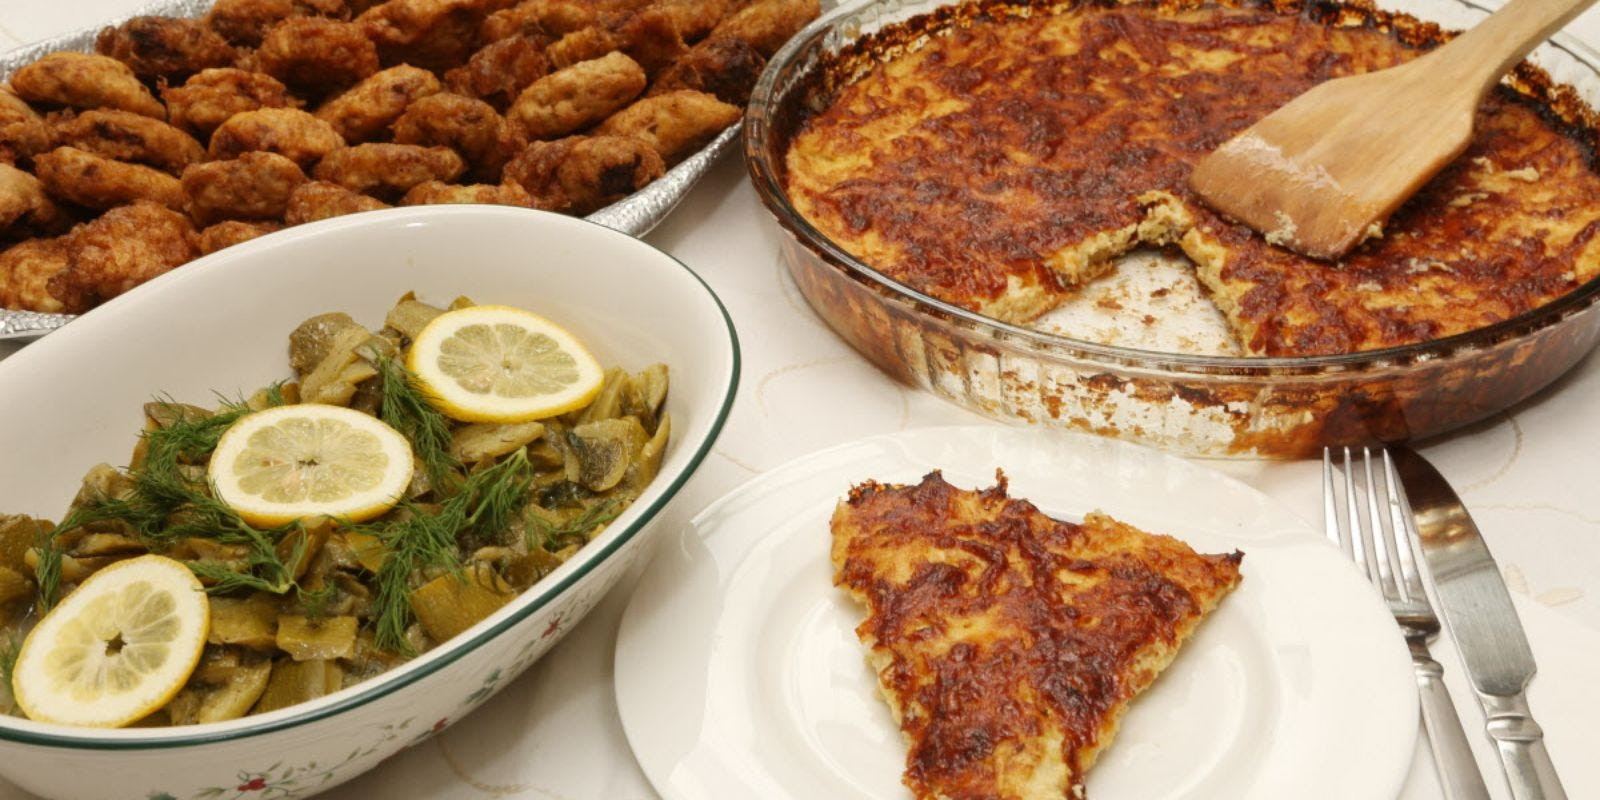 Passover Meals Ideas
 Passover seder menu ideas with Sephardic flavors